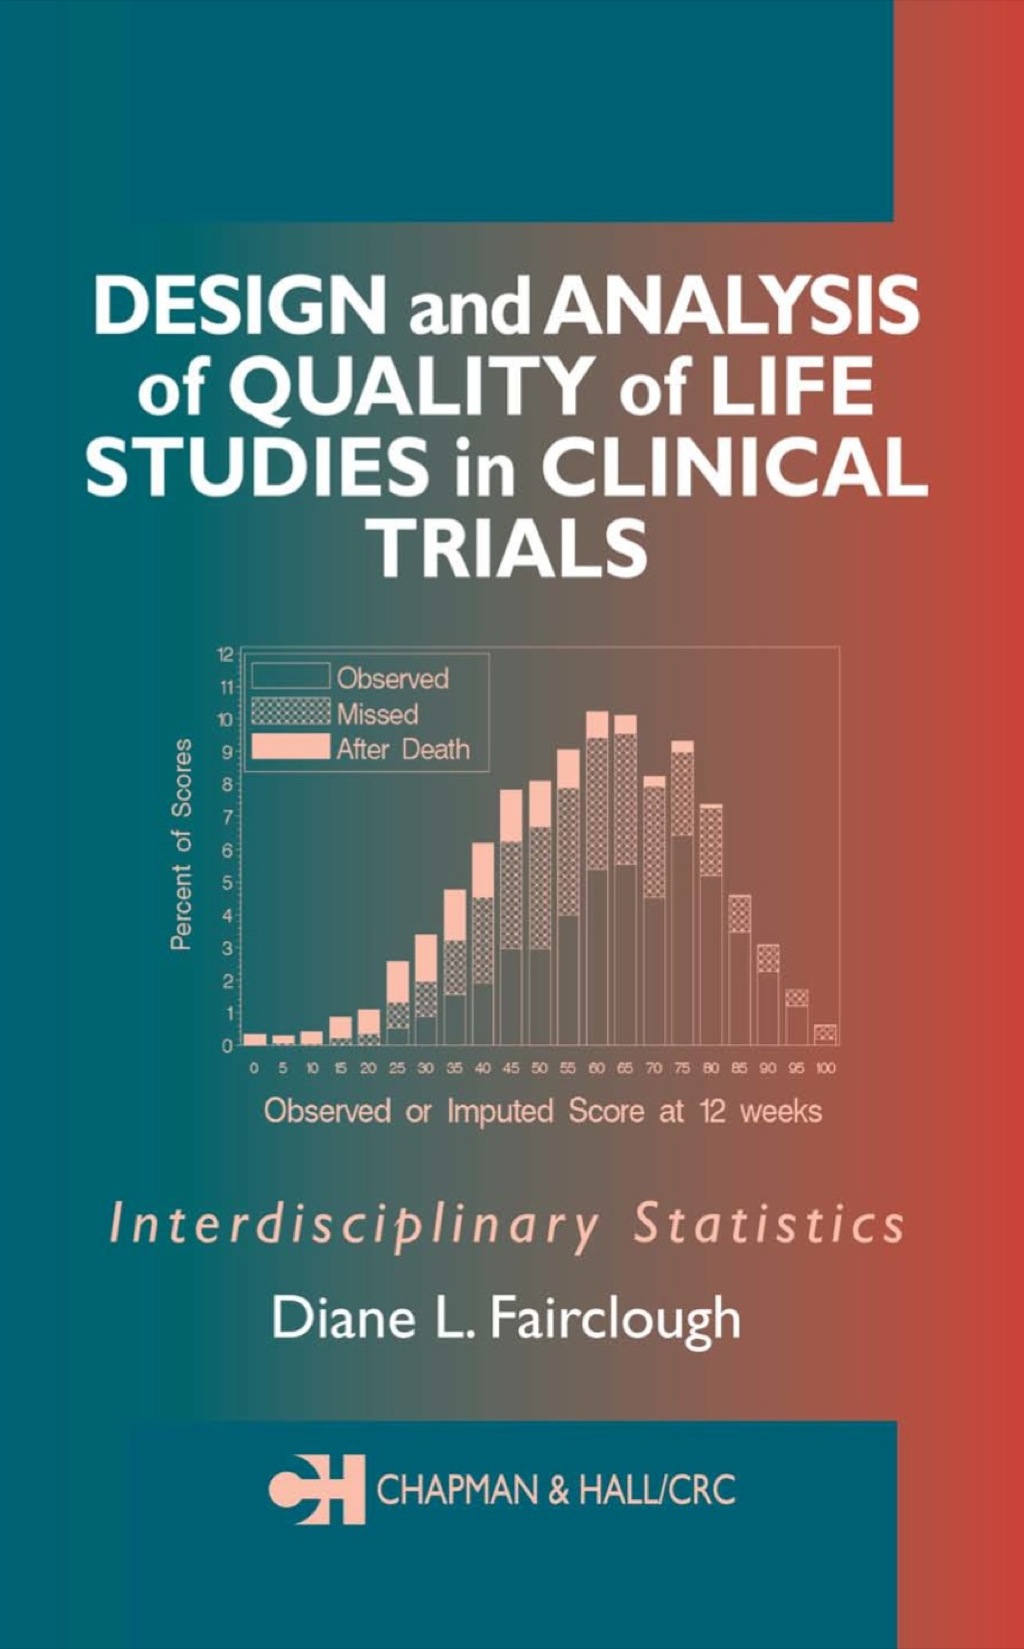 Design and Analysis of Quality of Life Studies in Clinical Trials (eBook) - Diane L. Fairclough